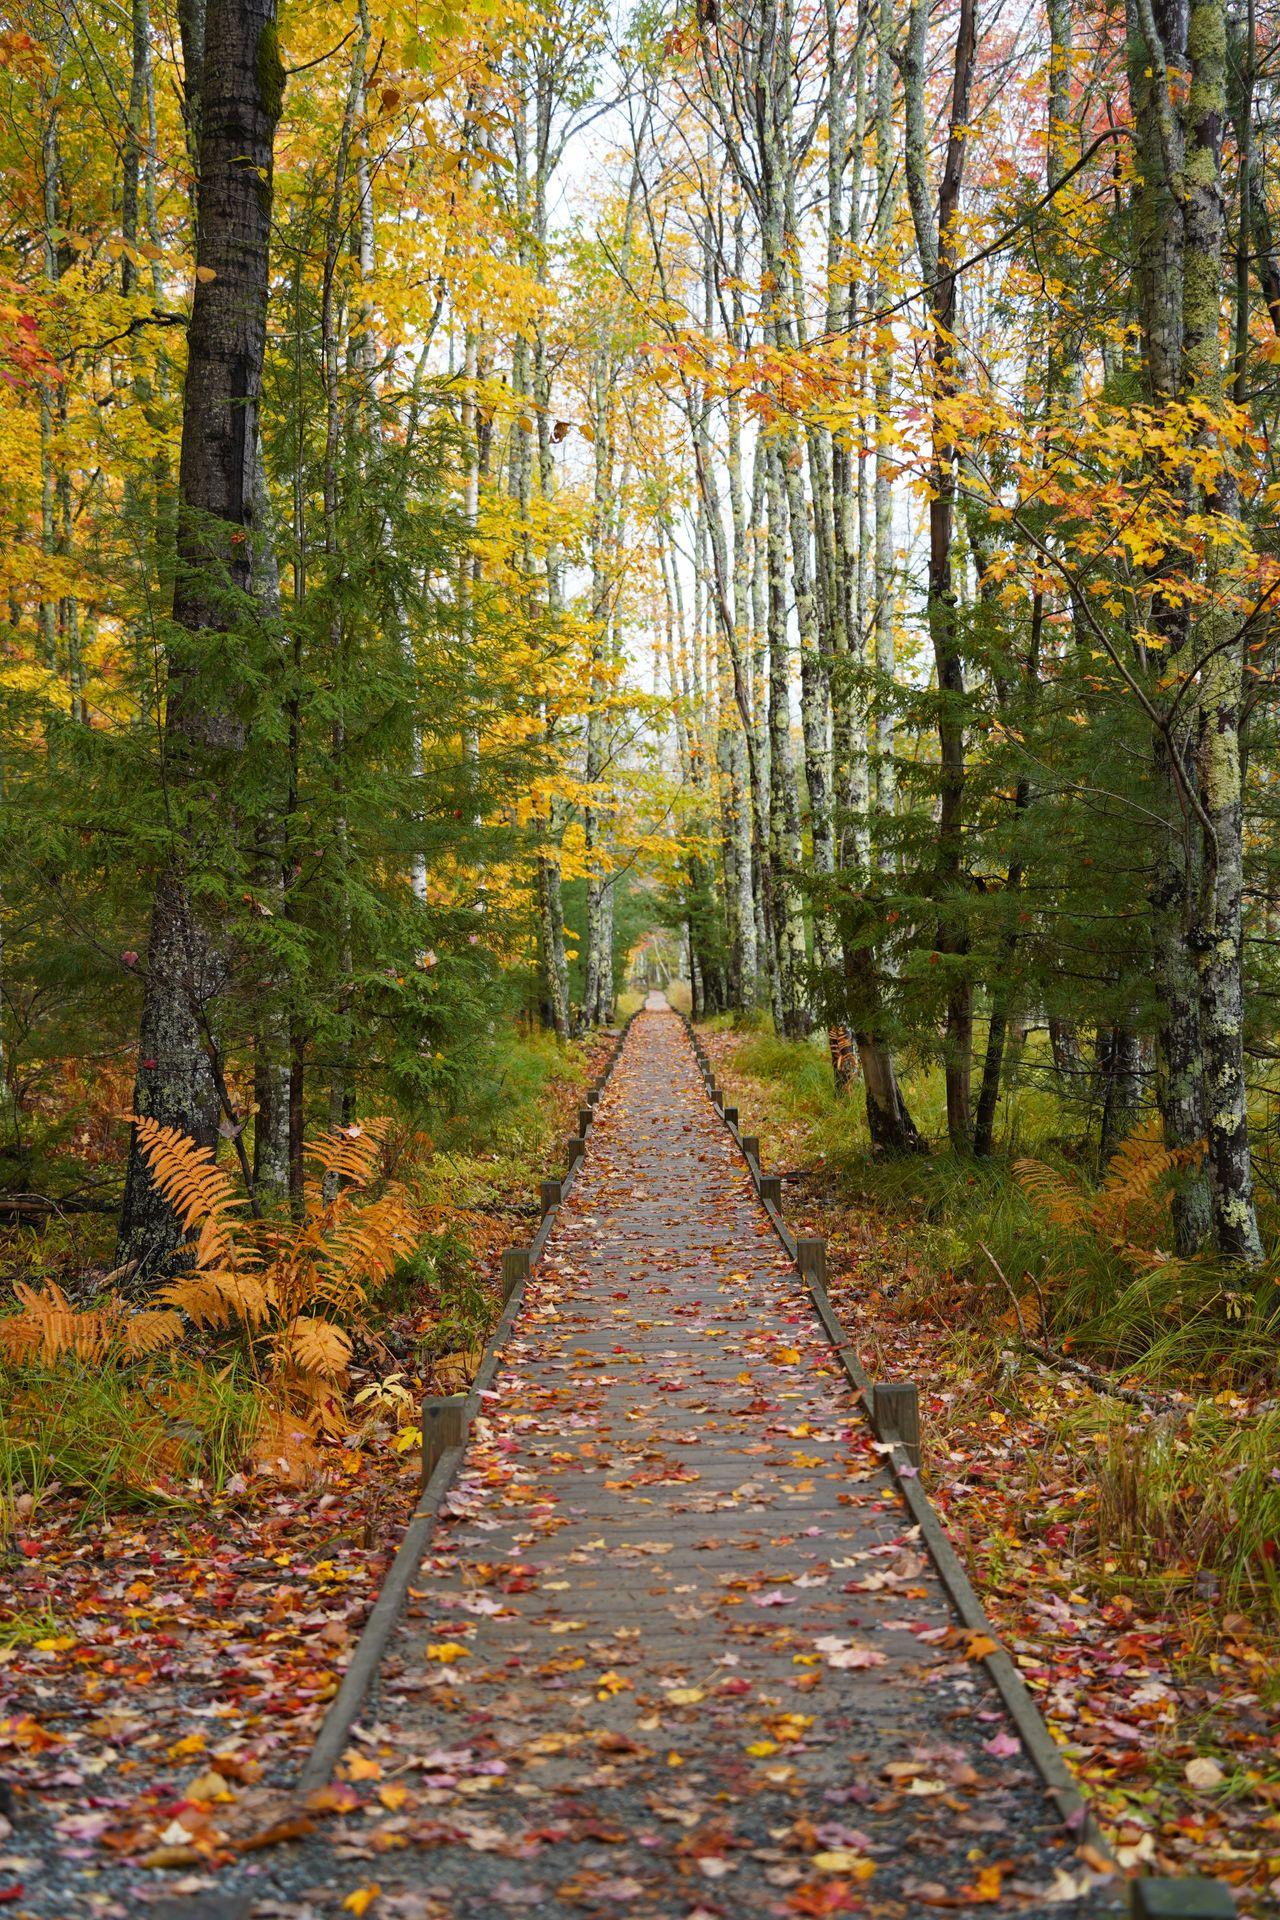 Looking down the boardwalk of the Jesup Path, surrounded by fall foliage.